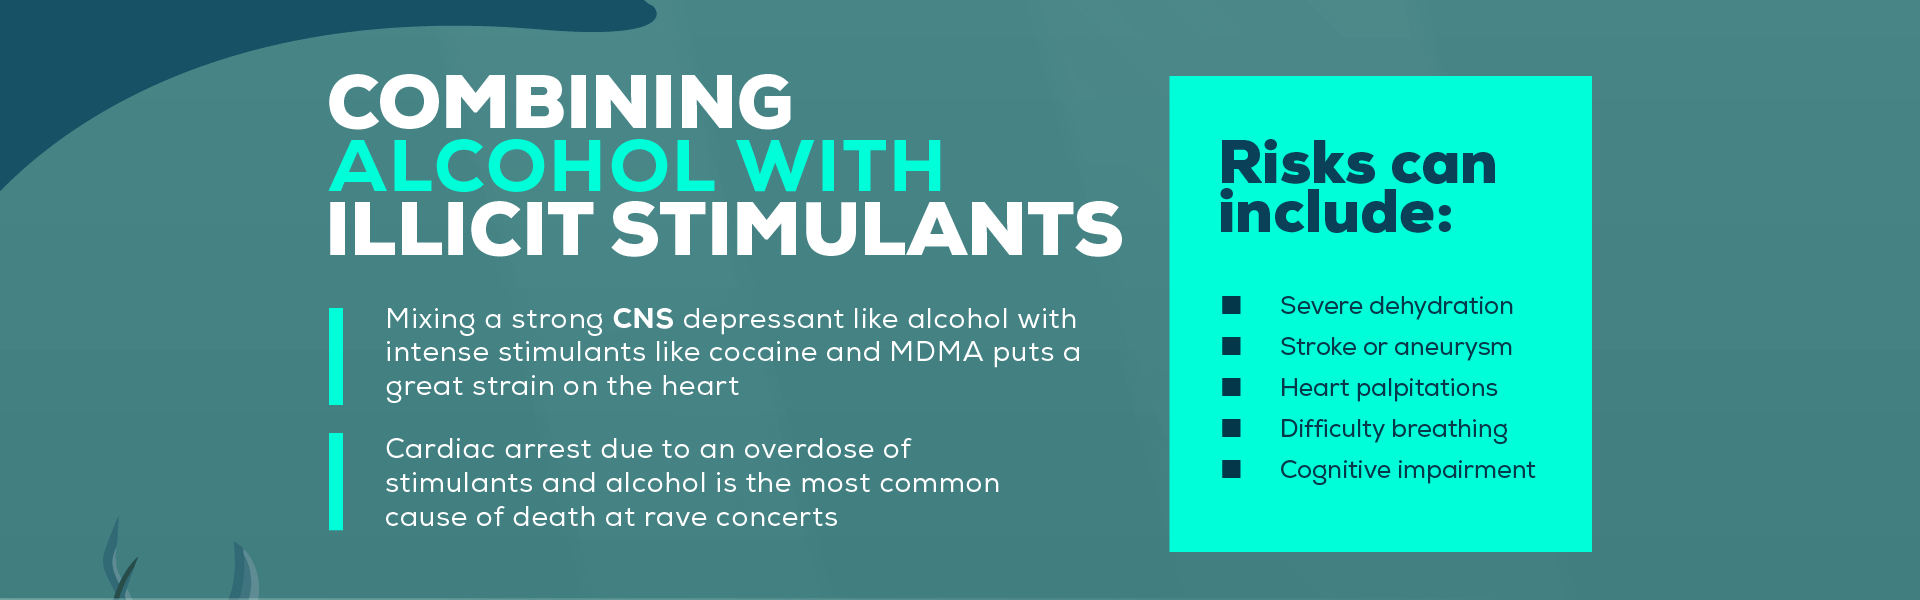 Combining Alcohol with Cocaine and Other Illicit Stimulants